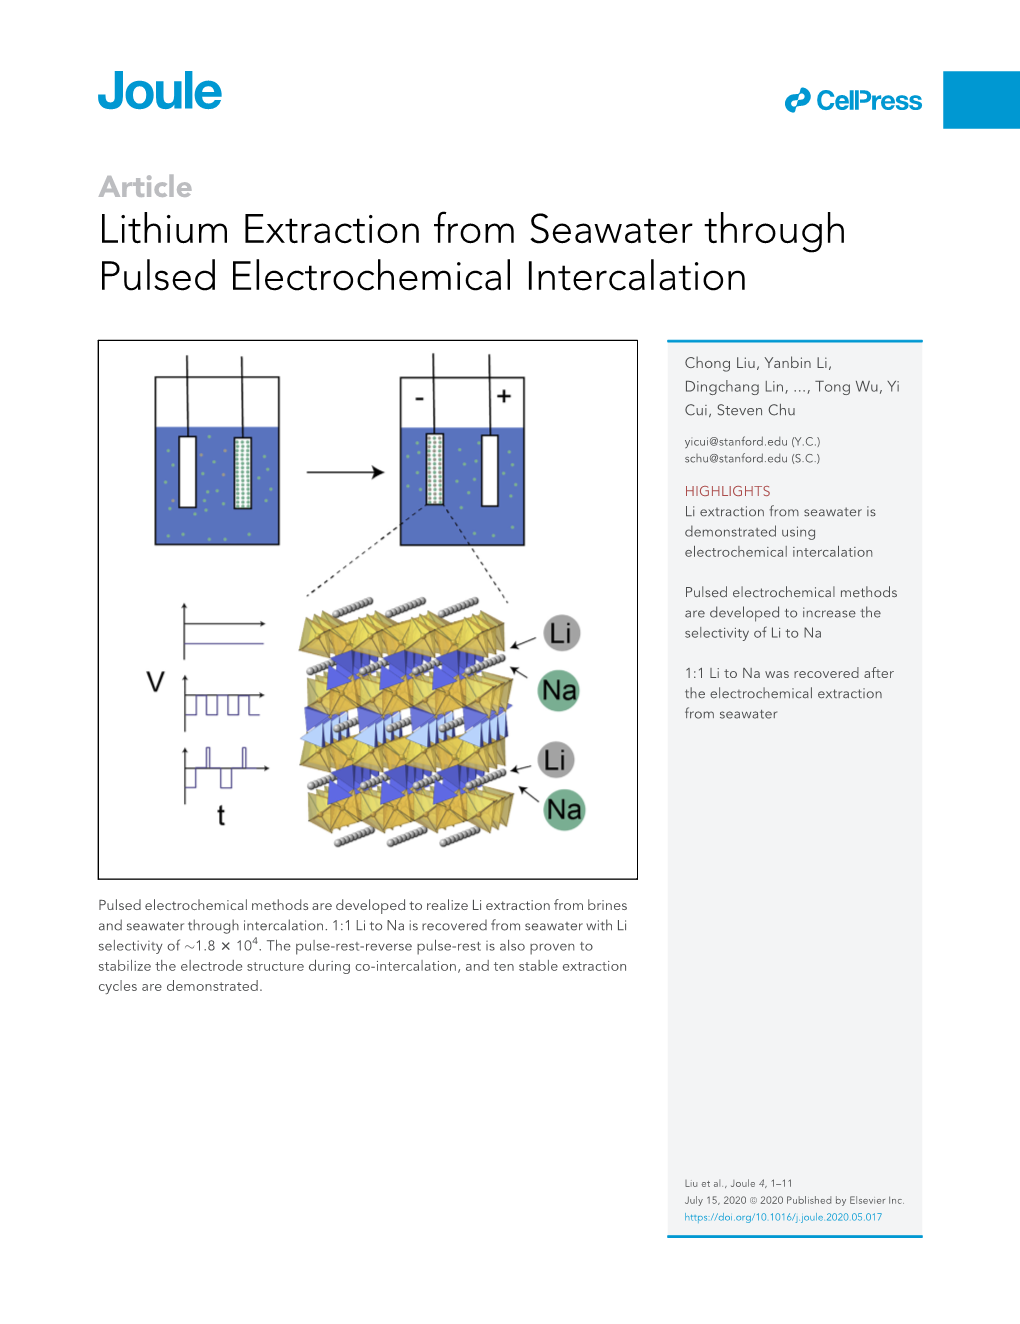 Lithium Extraction from Seawater Through Pulsed Electrochemical Intercalation